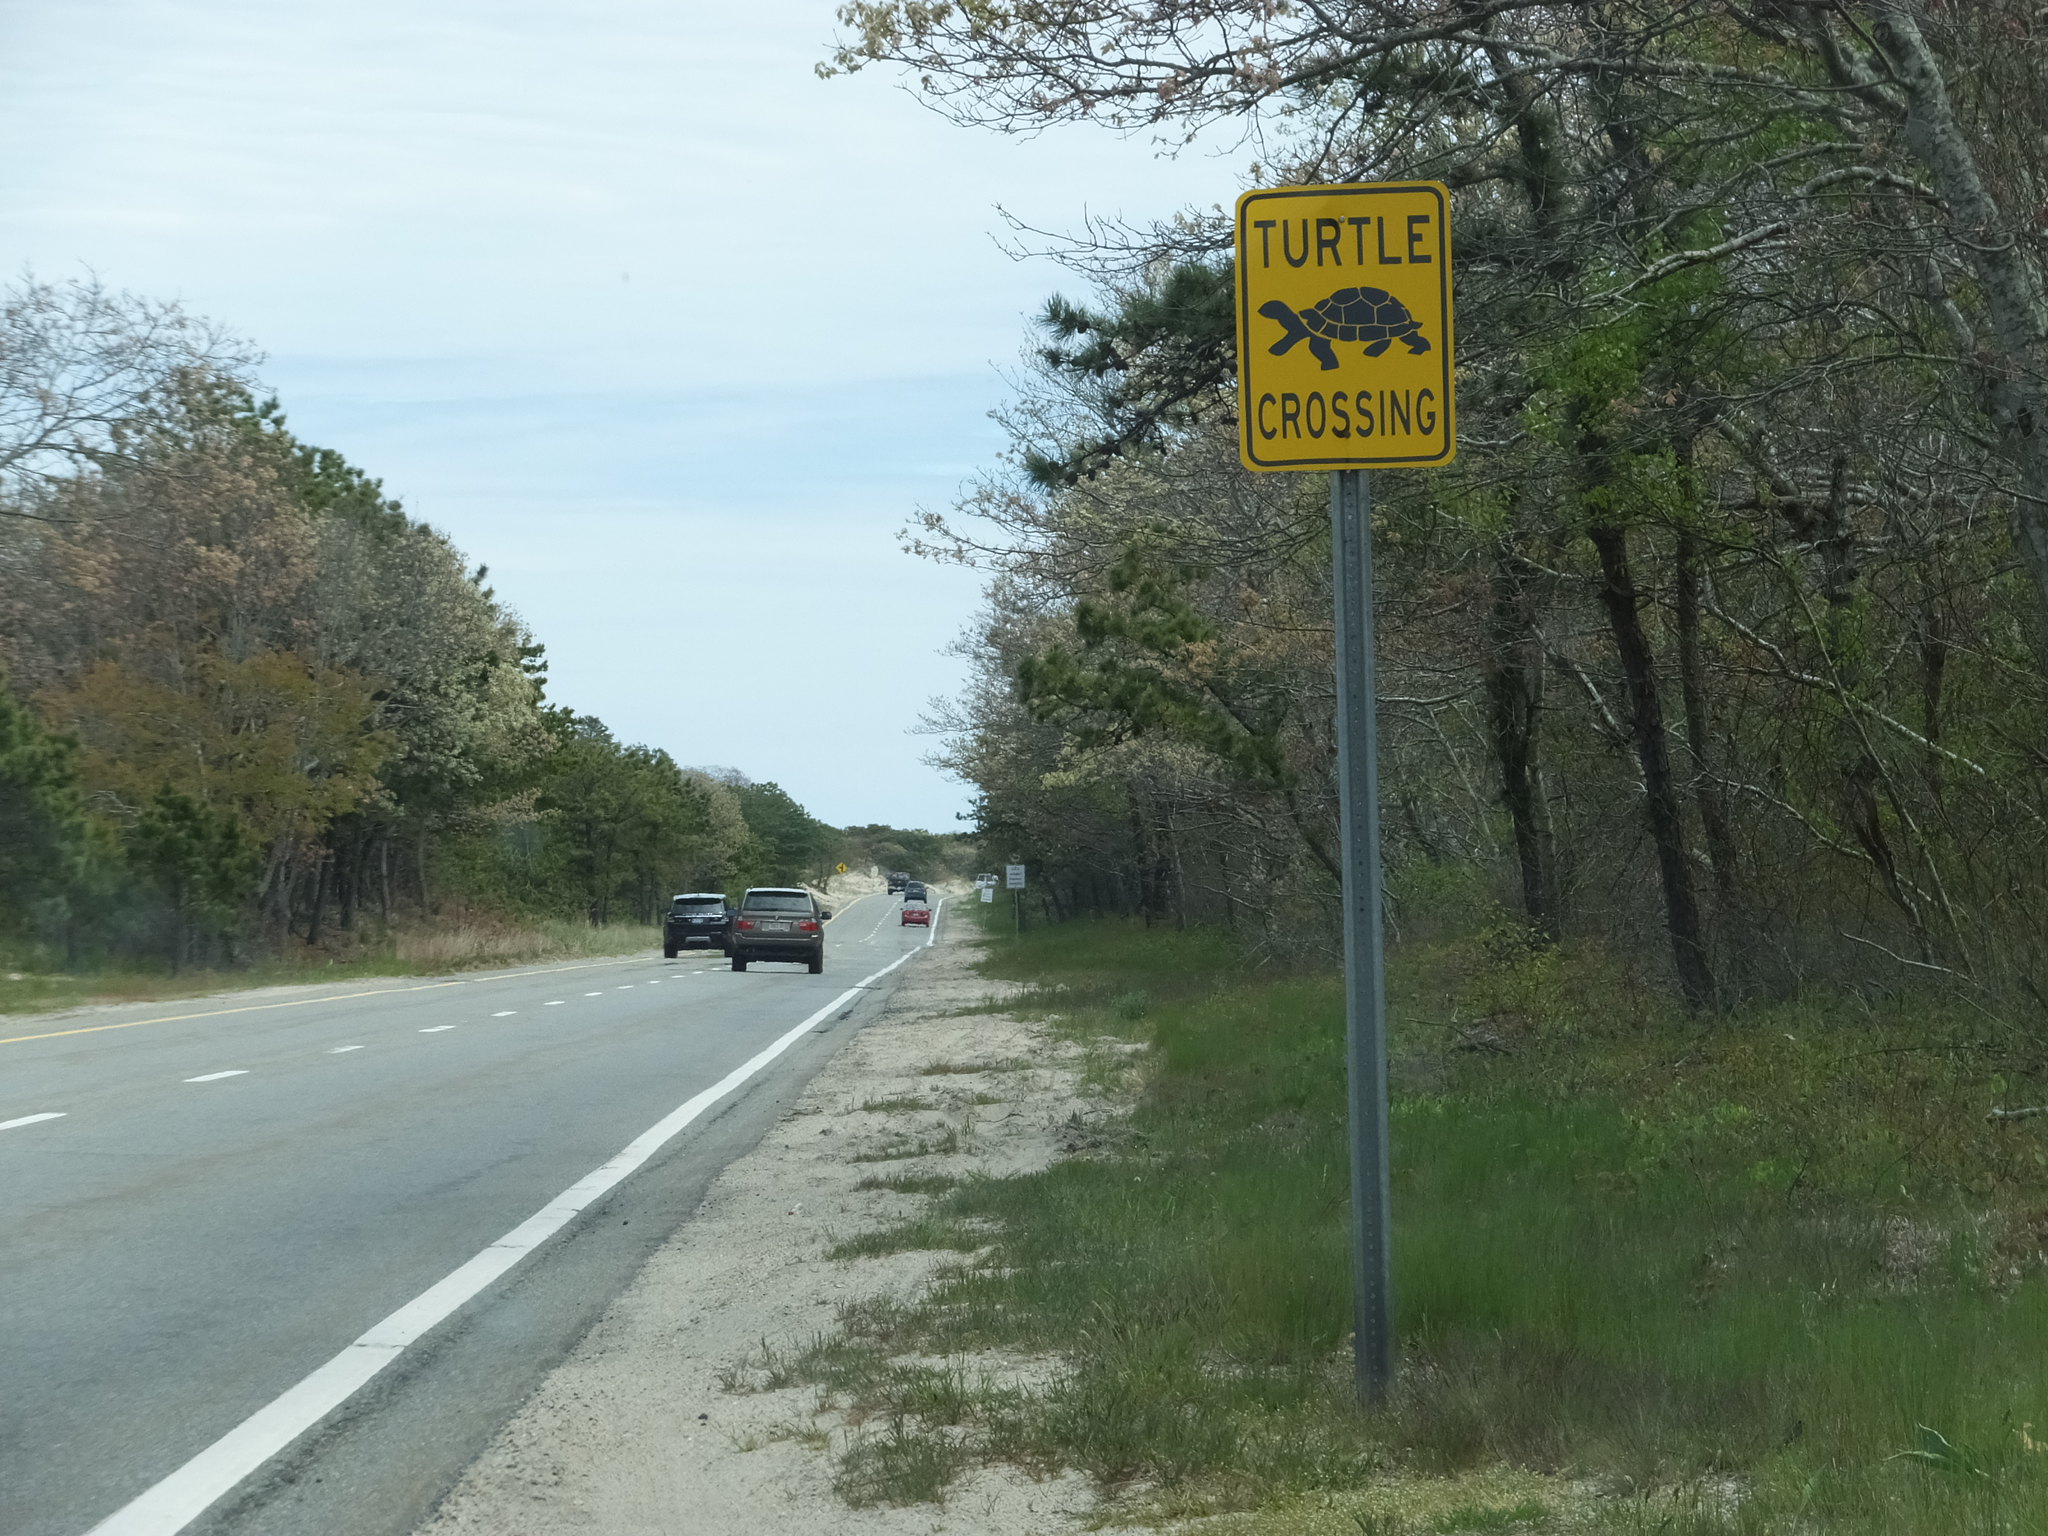 Turtle crossing sign on a rural road.